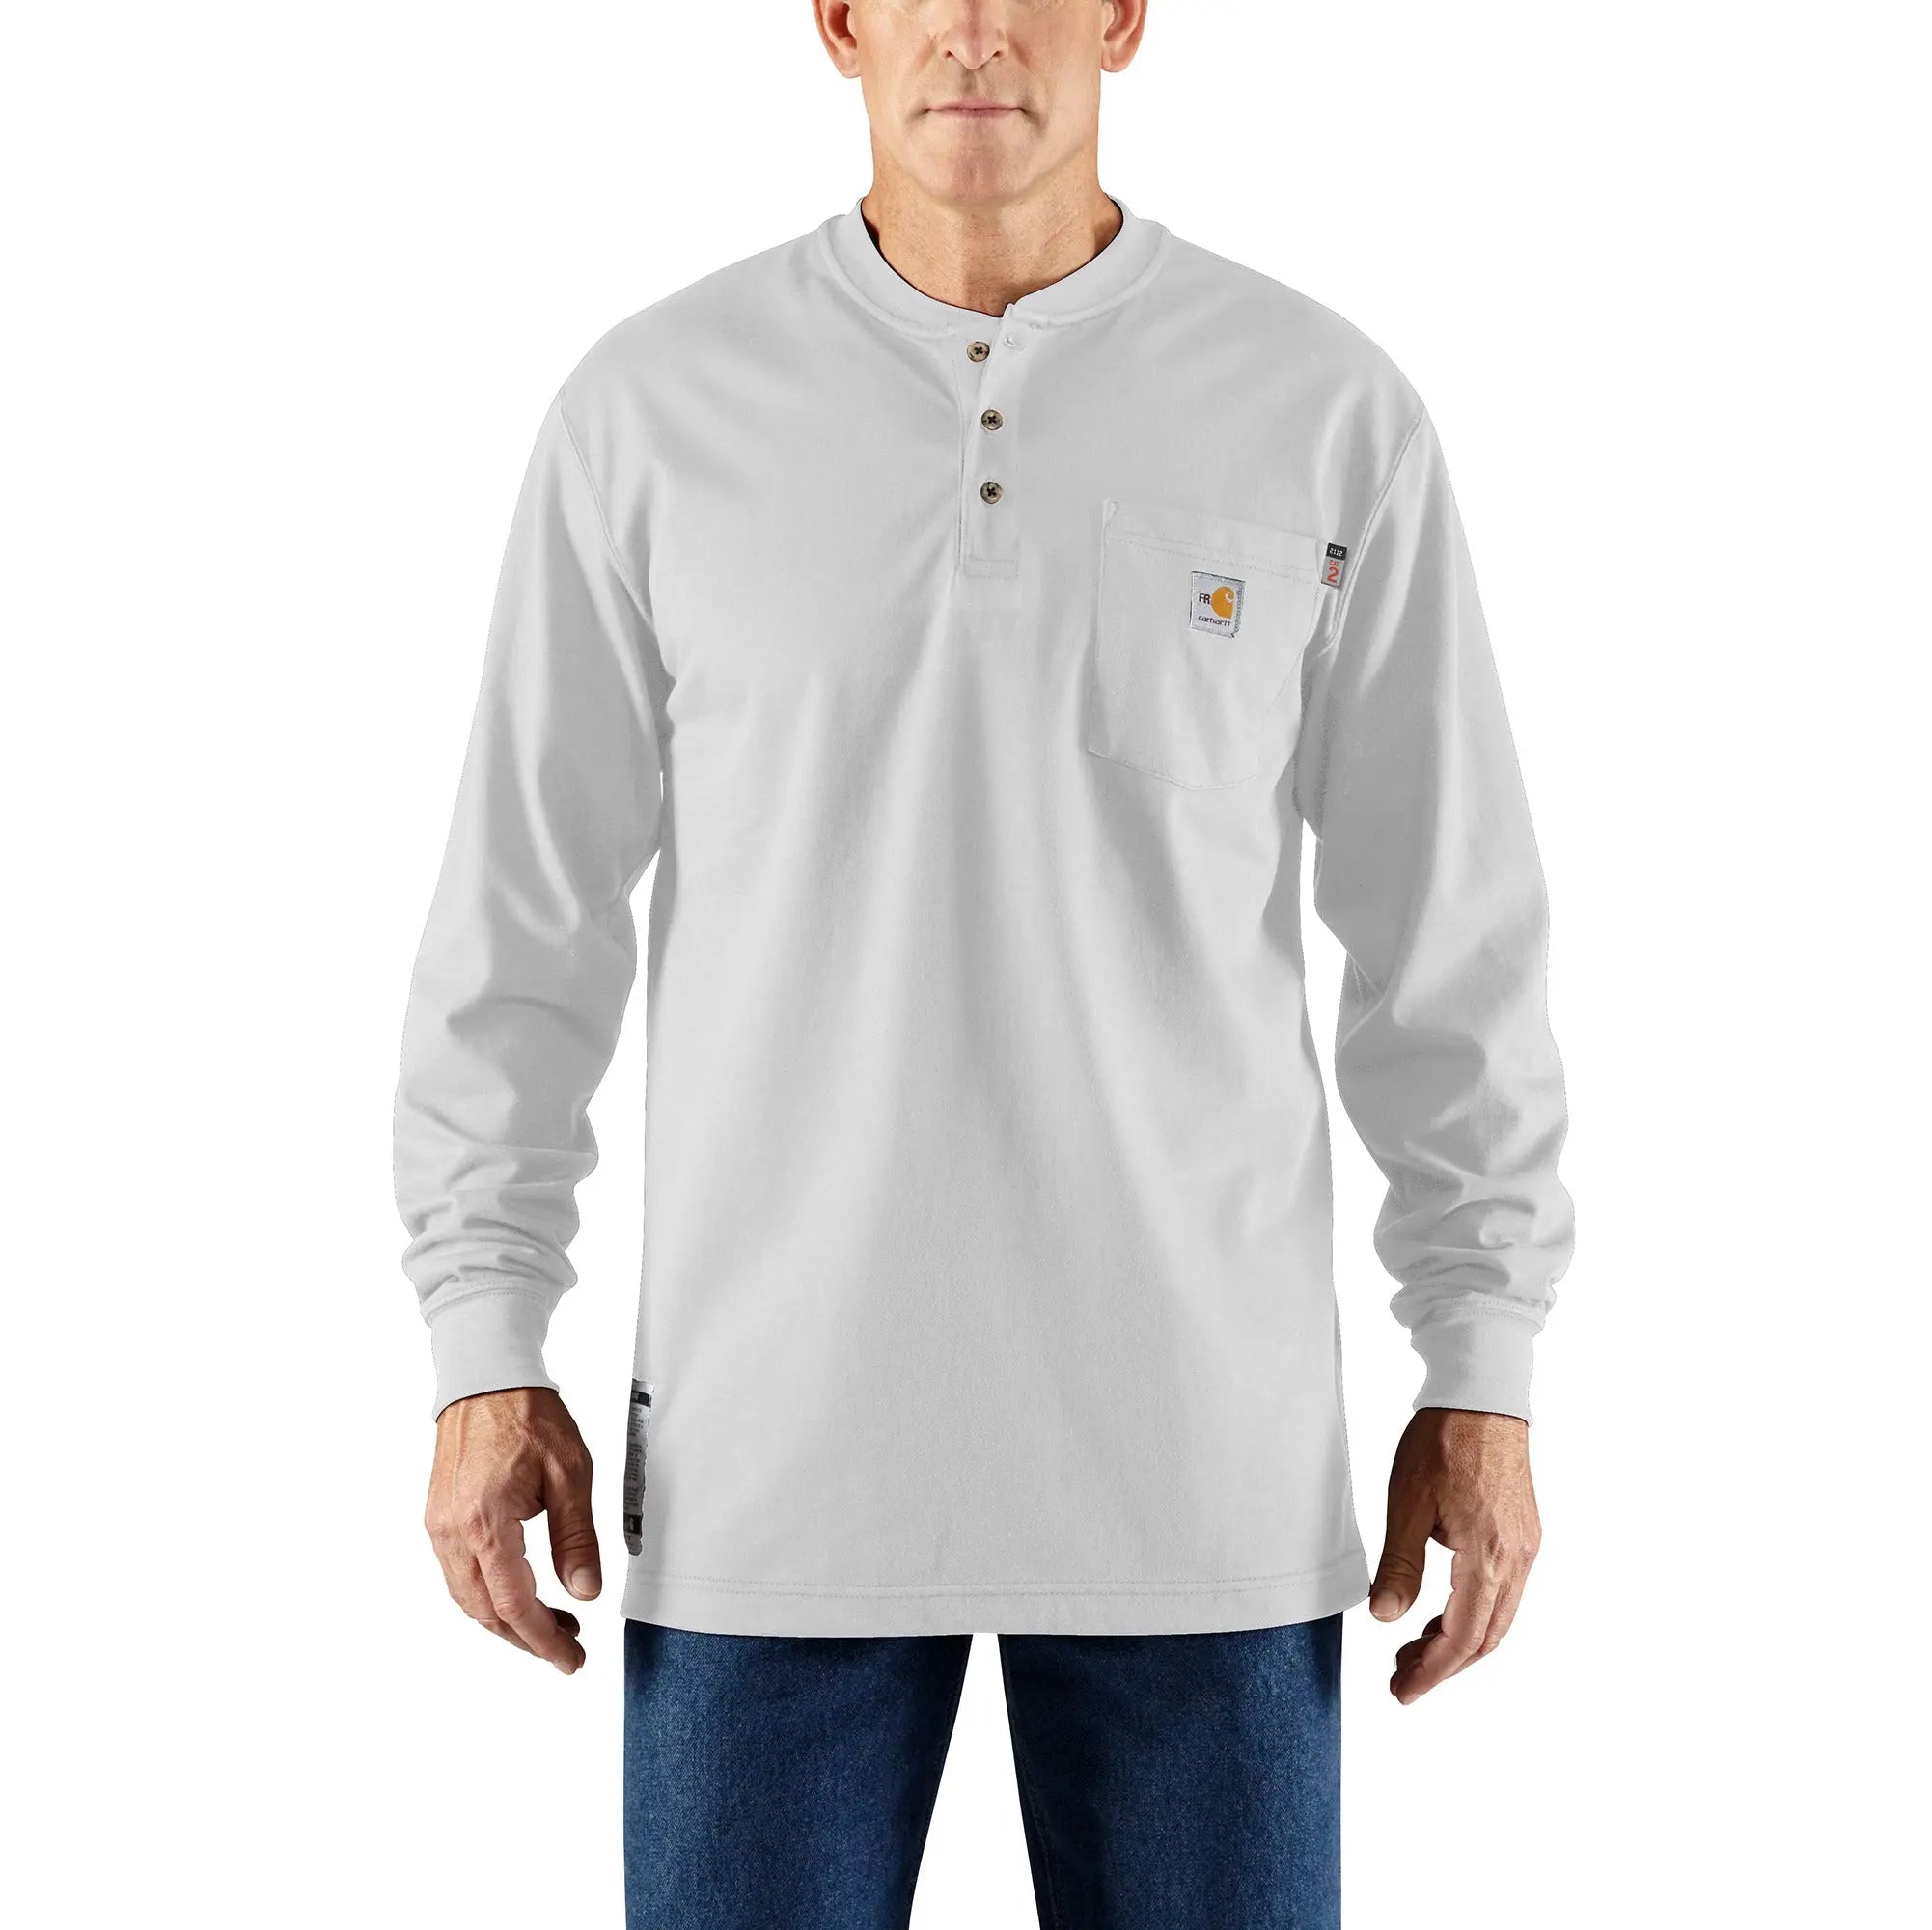 CARHARTT- FLAME-RESISTANT FORCE COTTON LONG-SLEEVE HENLEY  Becker Safety and Supply